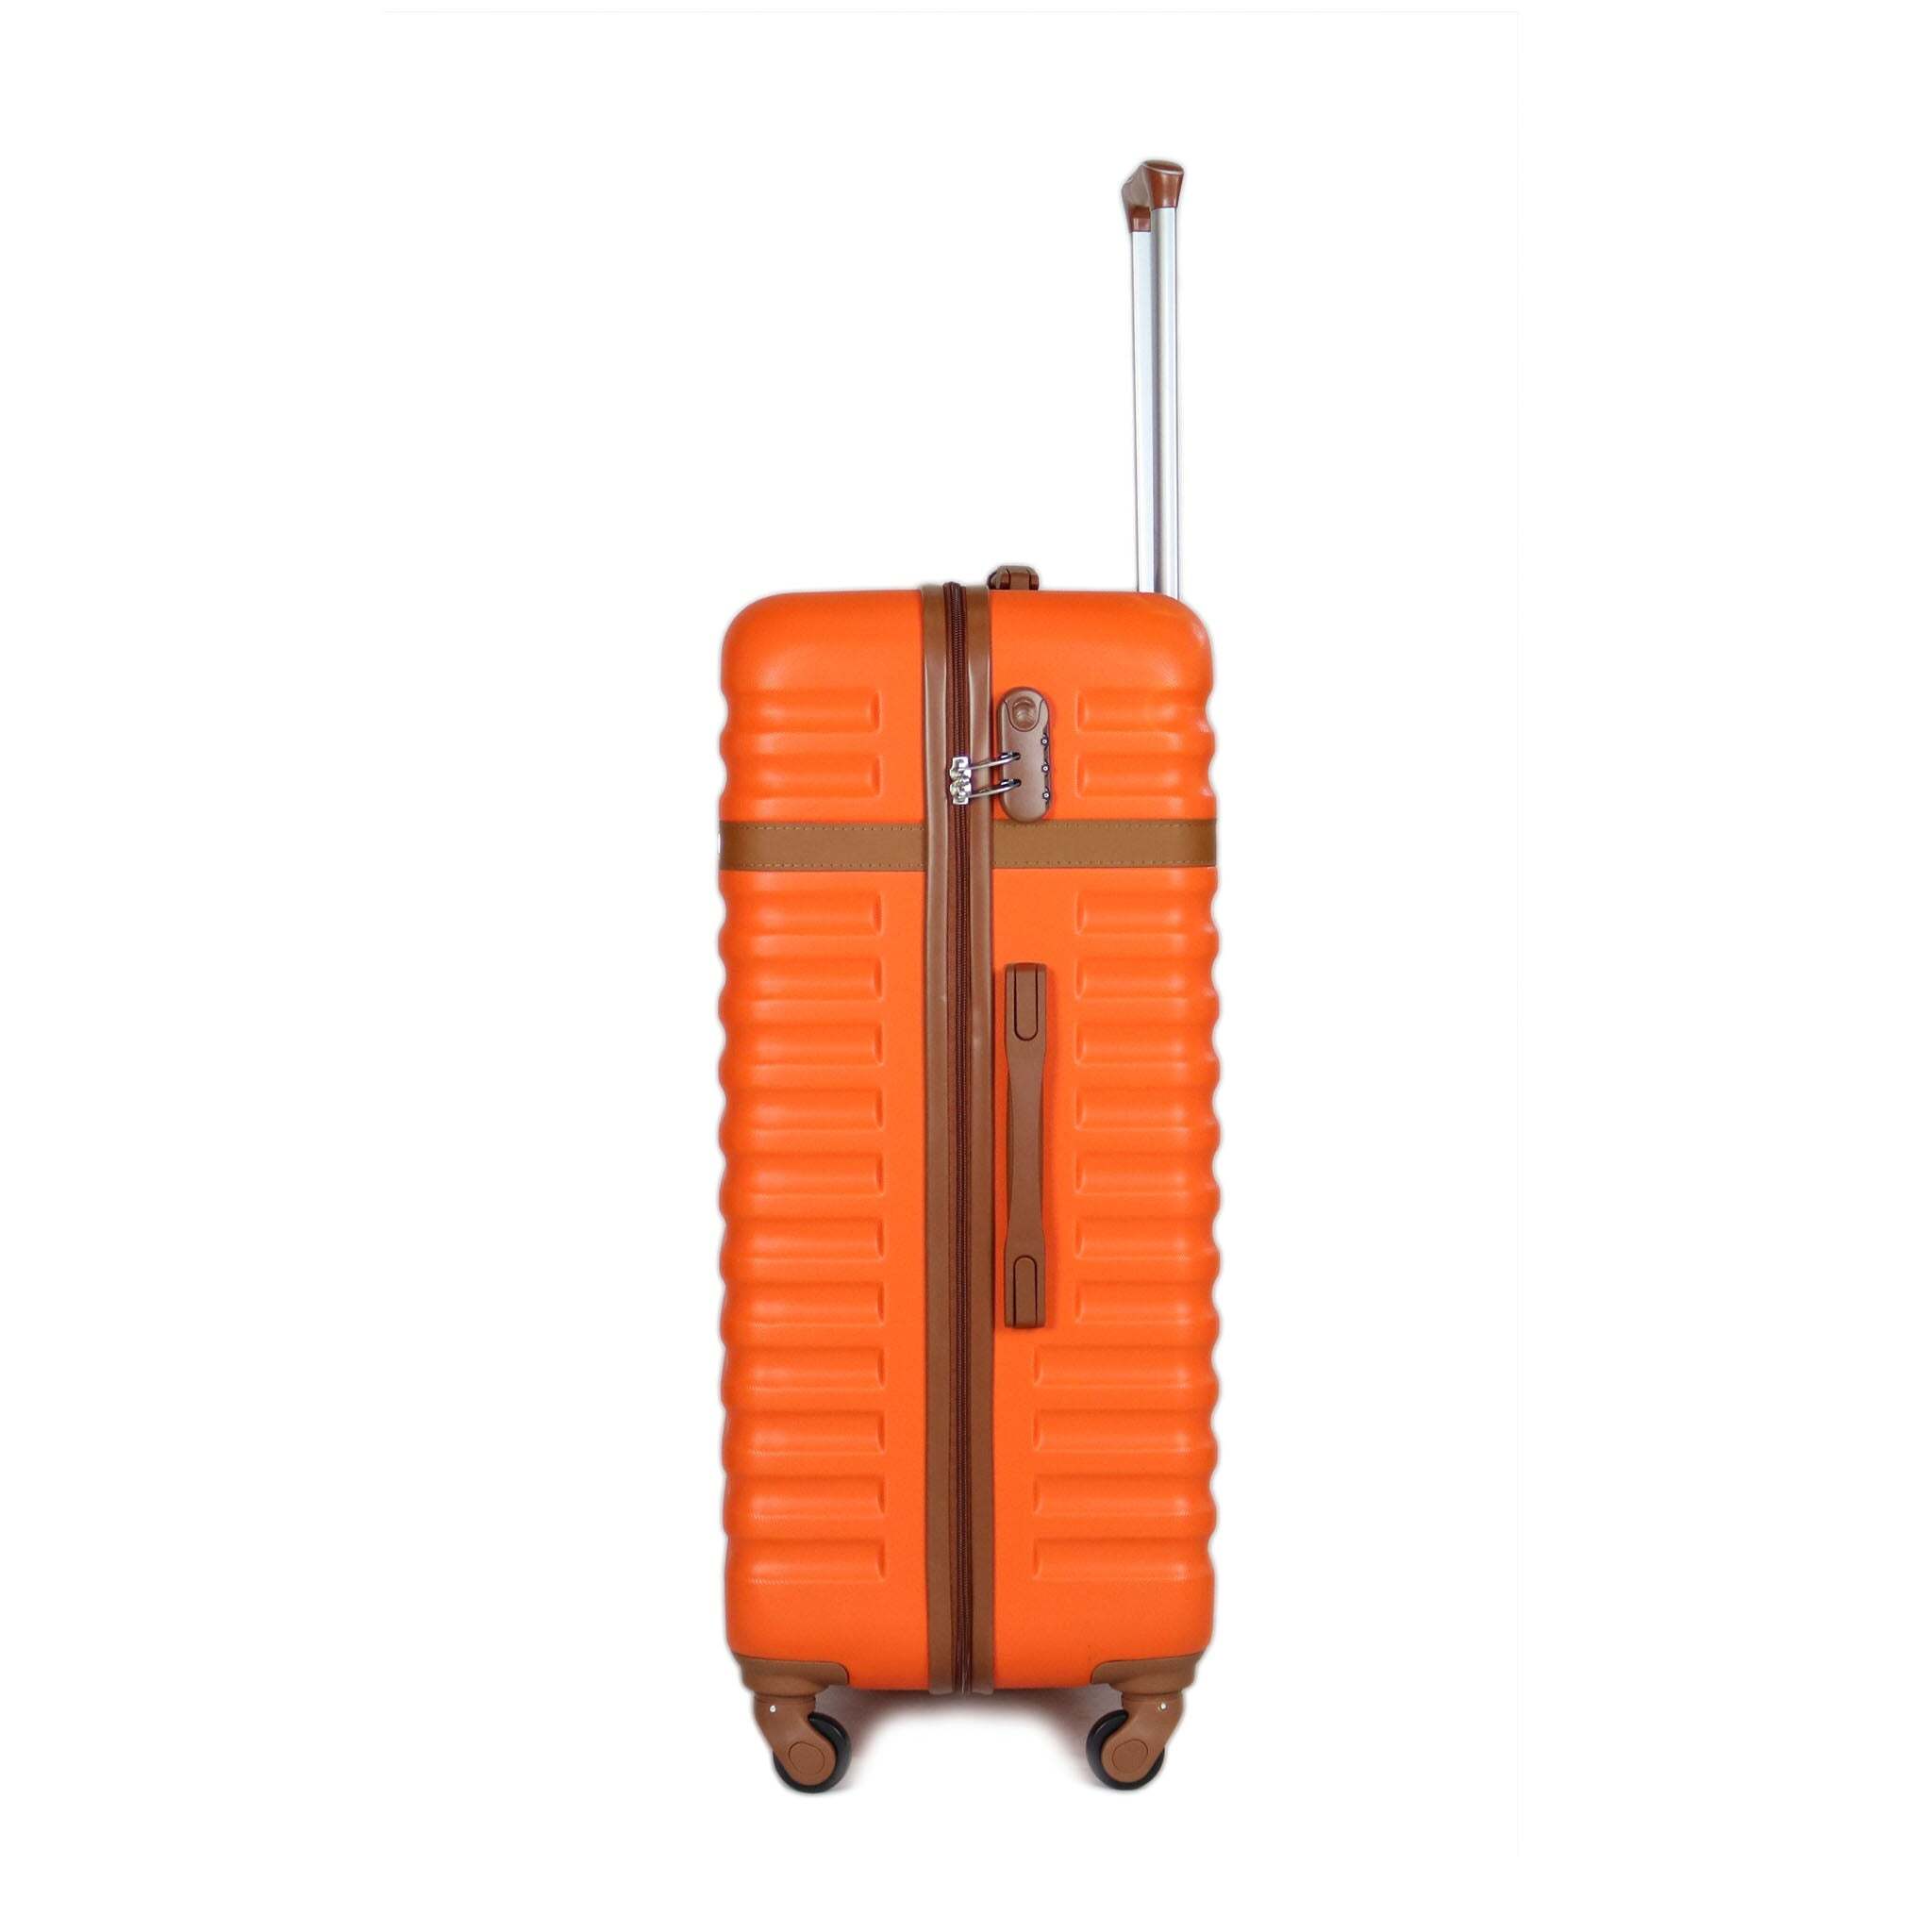 SKY BIRD CLASSIC ABS LUGGAGE TROLLEY CARRY-ON SMALL BAG 20INCH, ORANGE